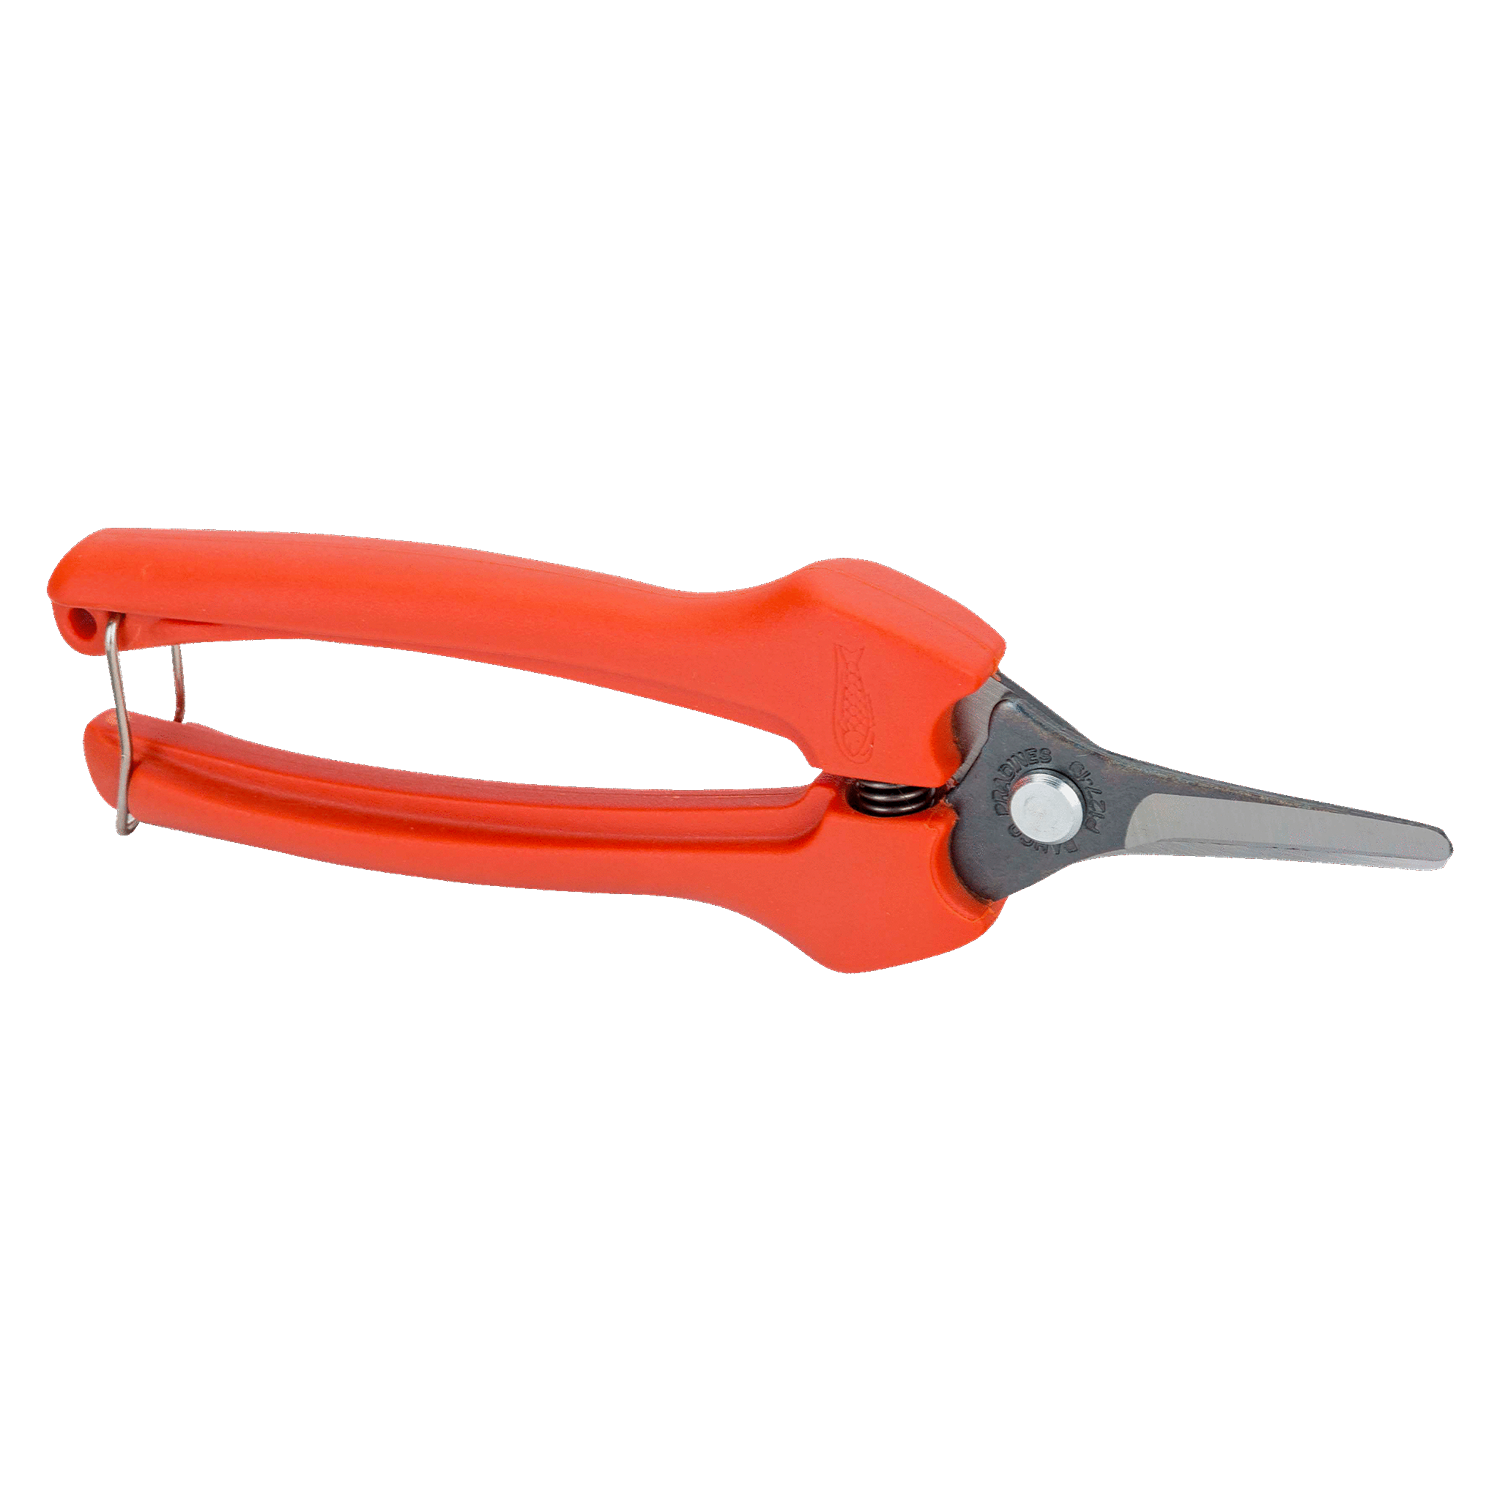 BAHCO P127 Straight Long Snips with Fibreglass Handle - Premium Snips from BAHCO - Shop now at Yew Aik.